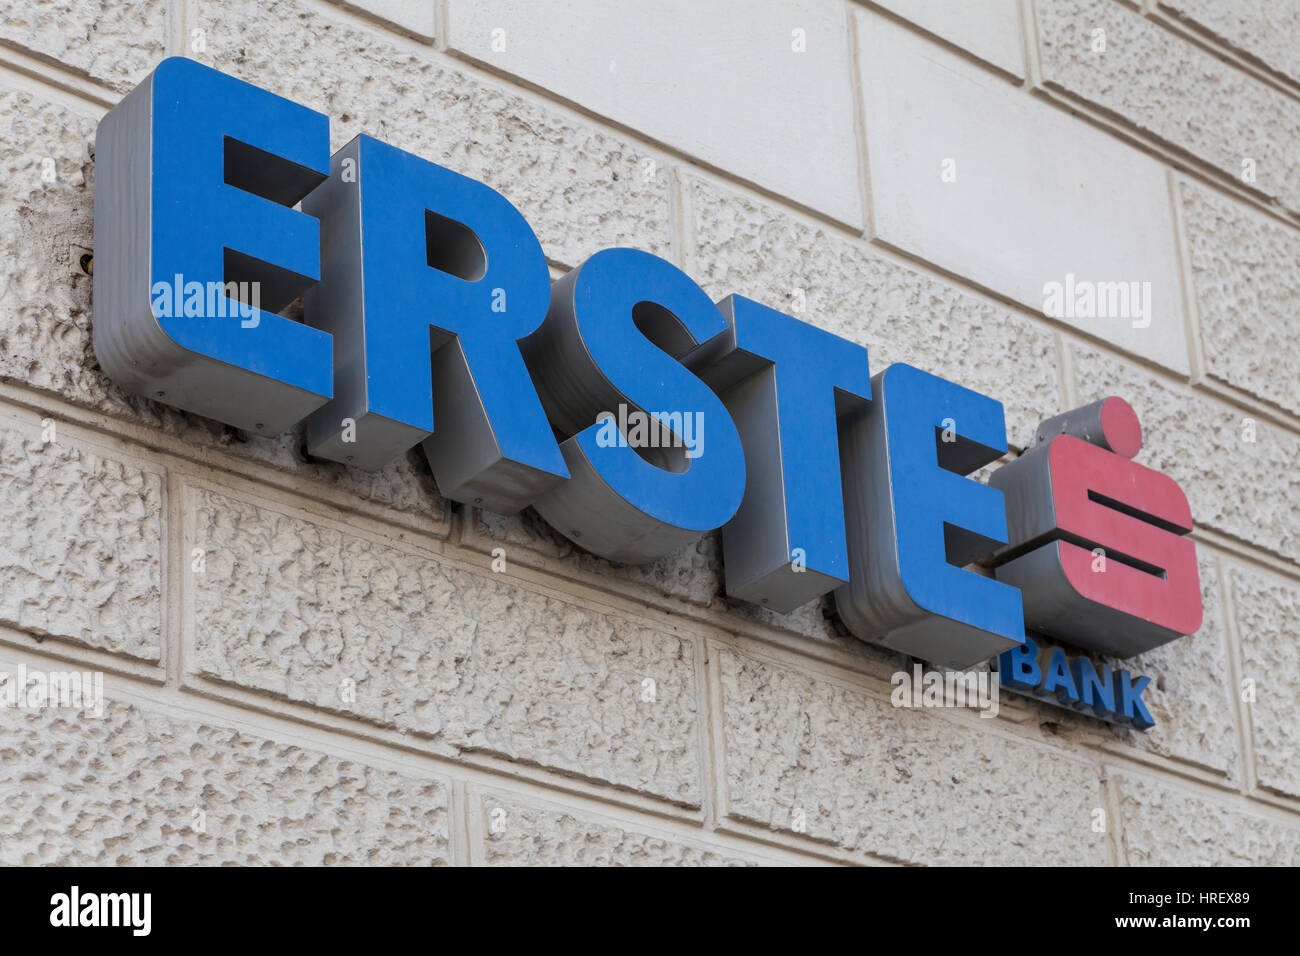 VIENNA, AUSTRIA, DEC. 7th, 2017 - ERSTE SPARKASSE is the second leading big consumers bank in Austria with subsidiaries allover Central Eastern Europe Stock Photo